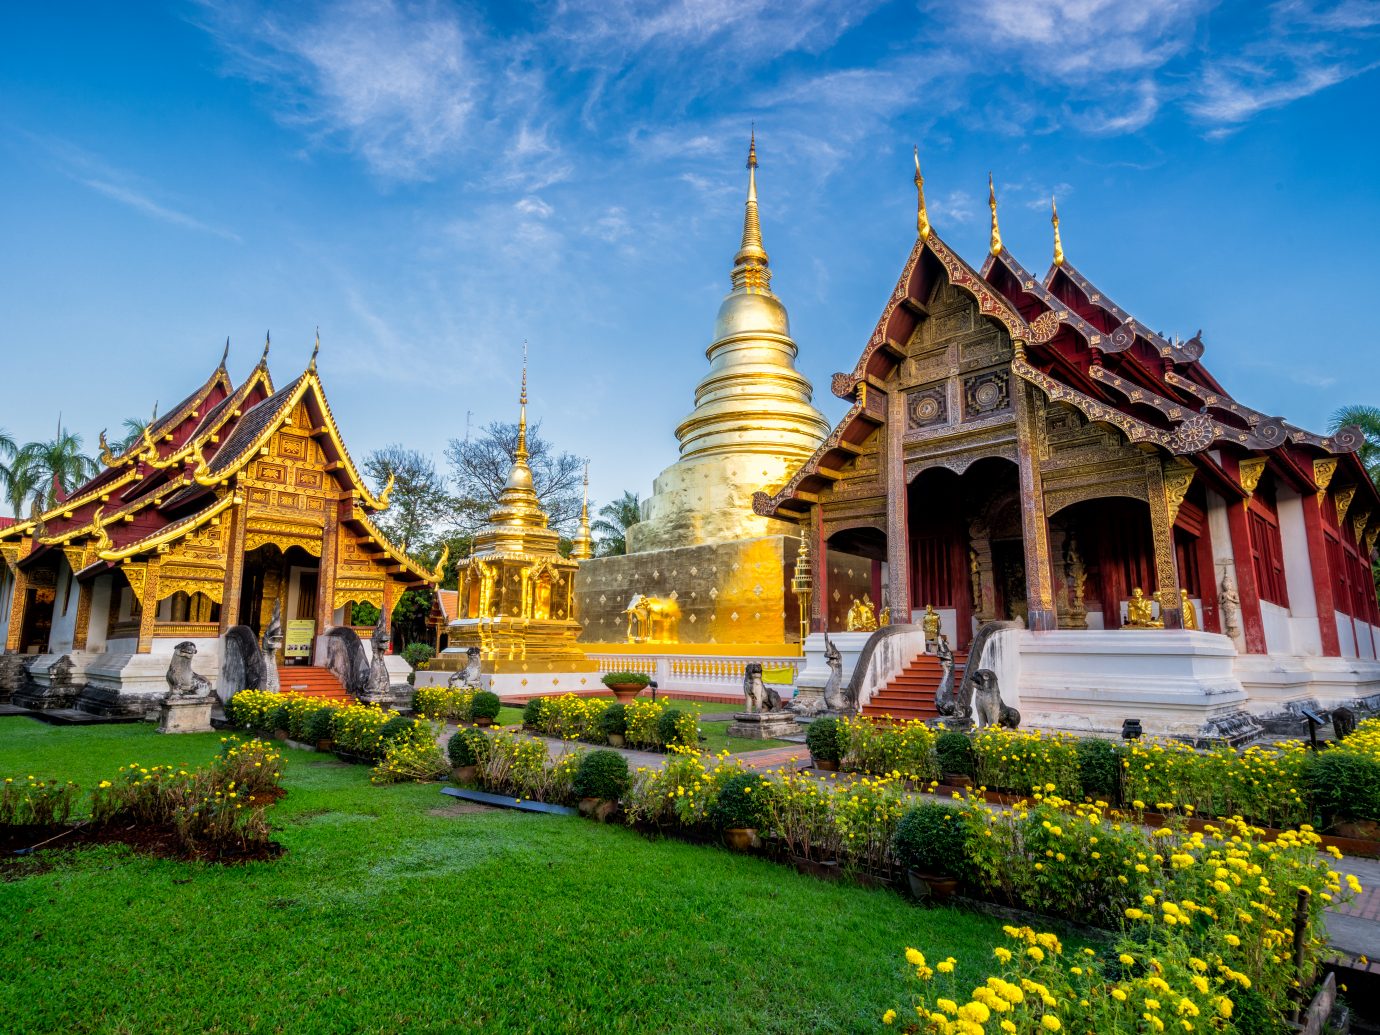 Sunrise scence of Wat Phra Singh temple. in the old city center of Chiang Mai,Thailand.